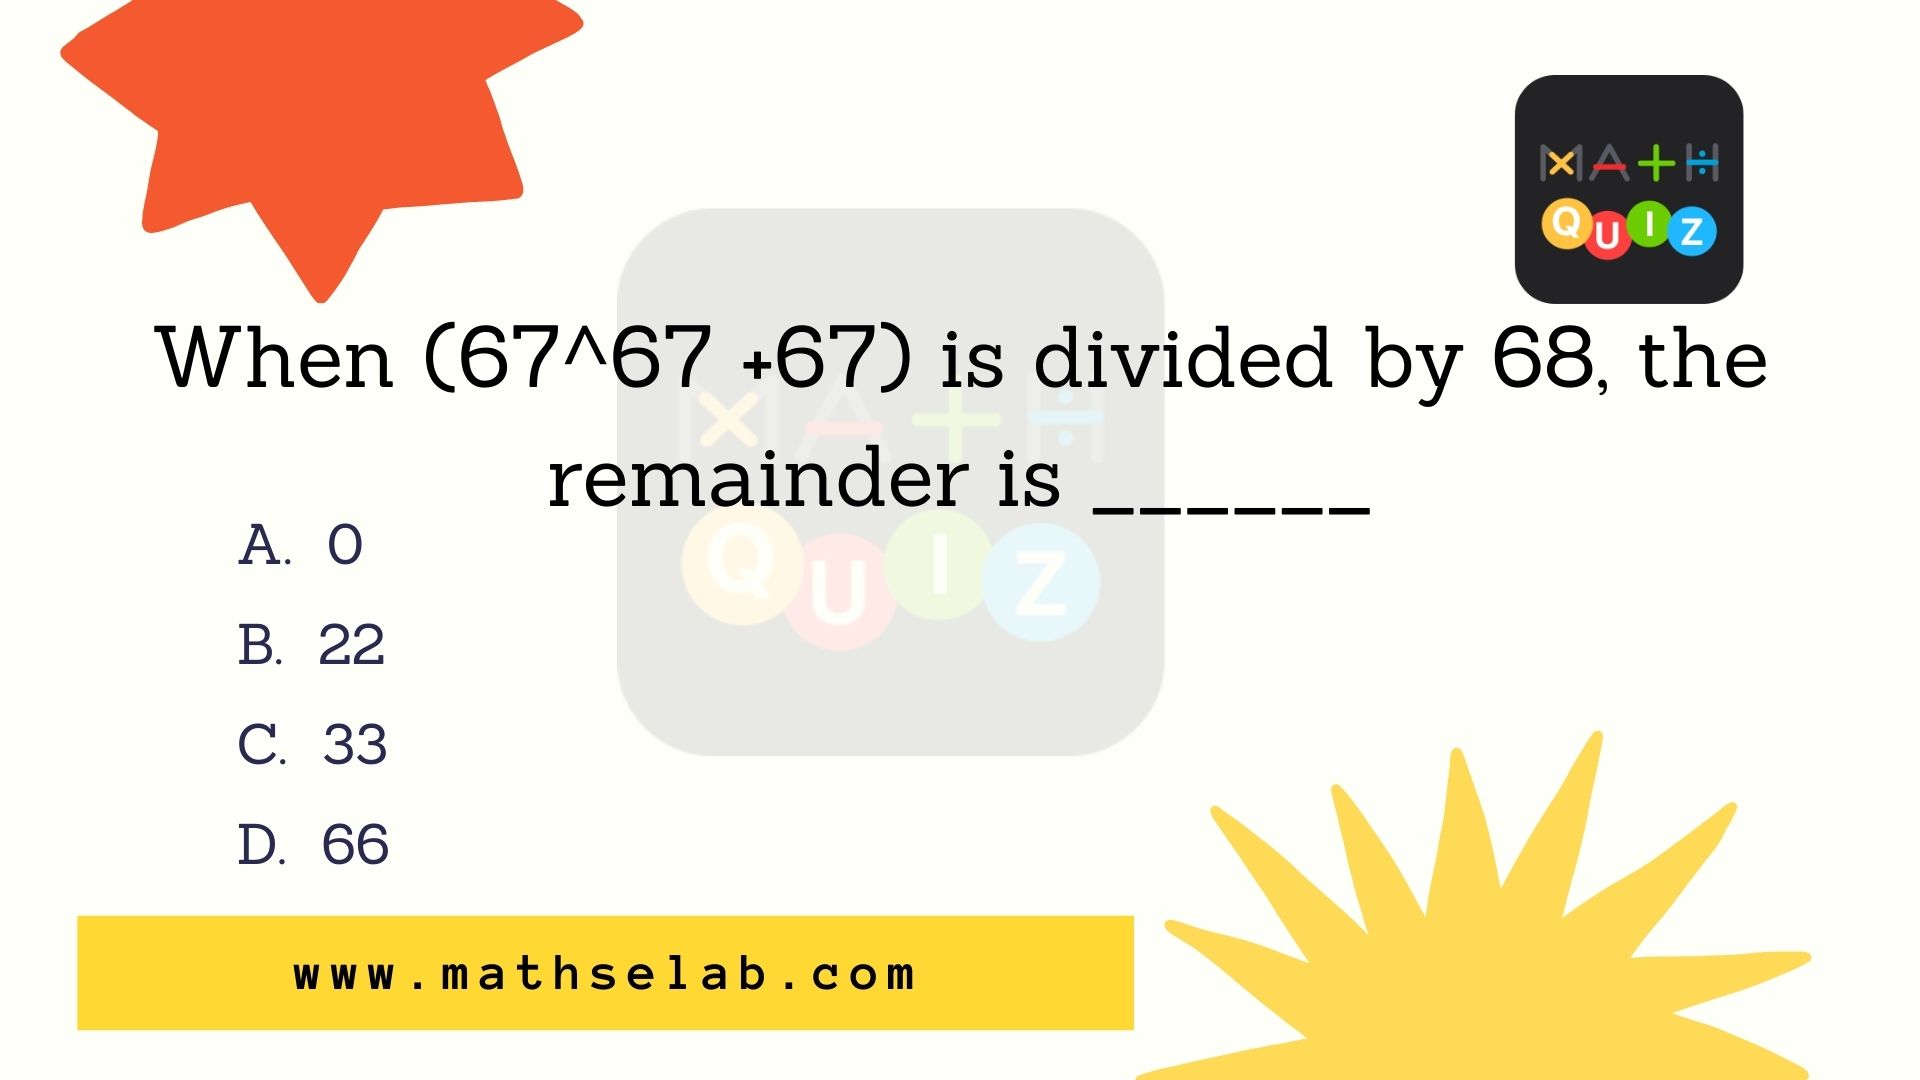 When (67^67 +67) is divided by 68, the remainder is ______